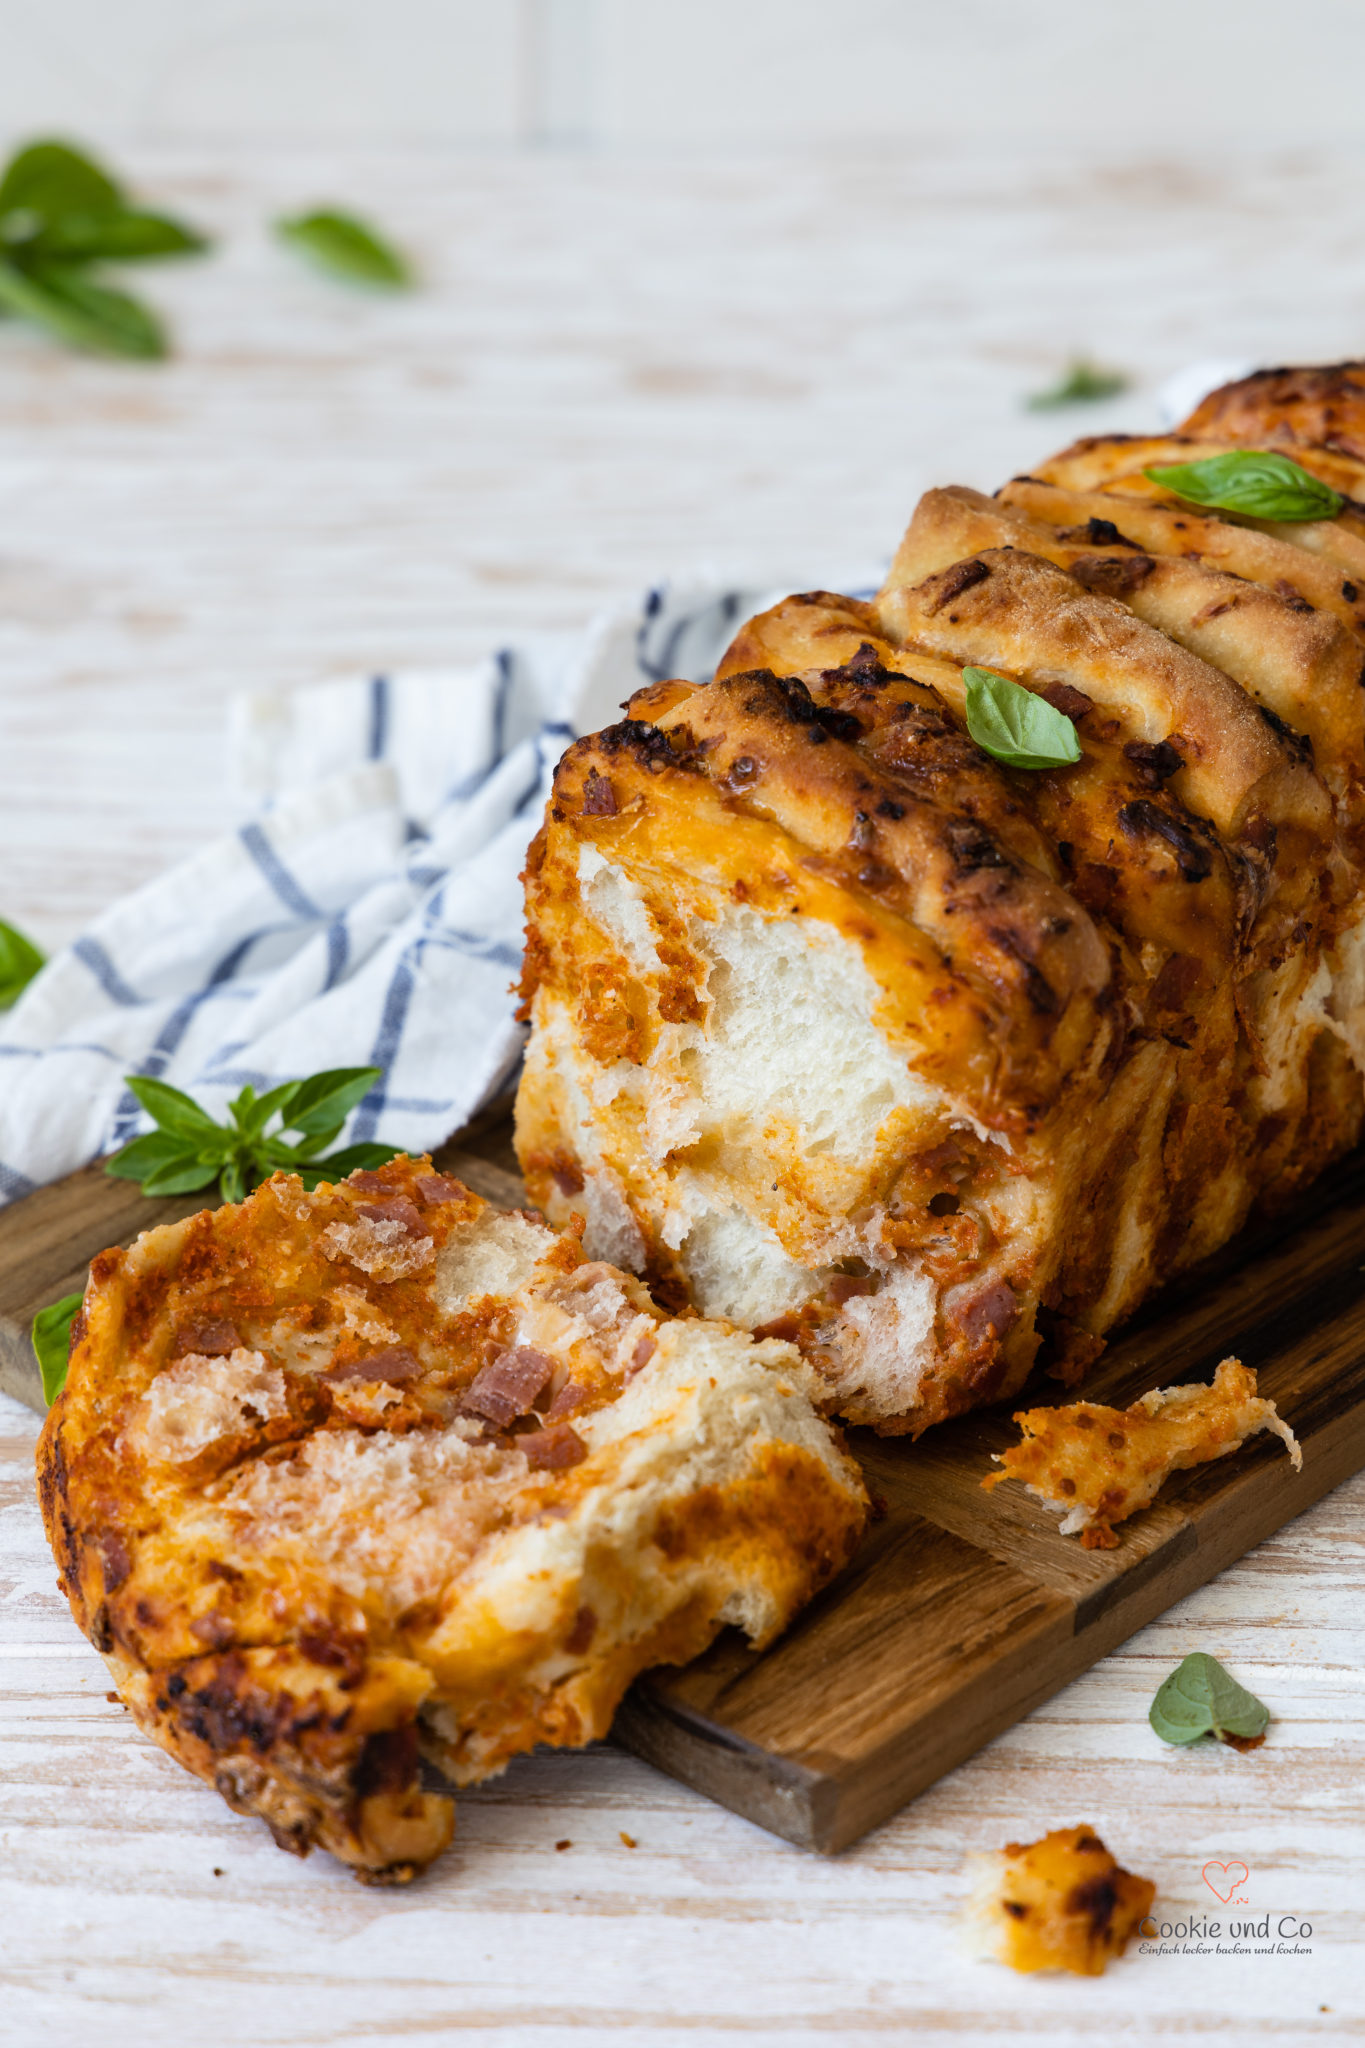 Pizza Zupfbrot (Pull Apart Bread)